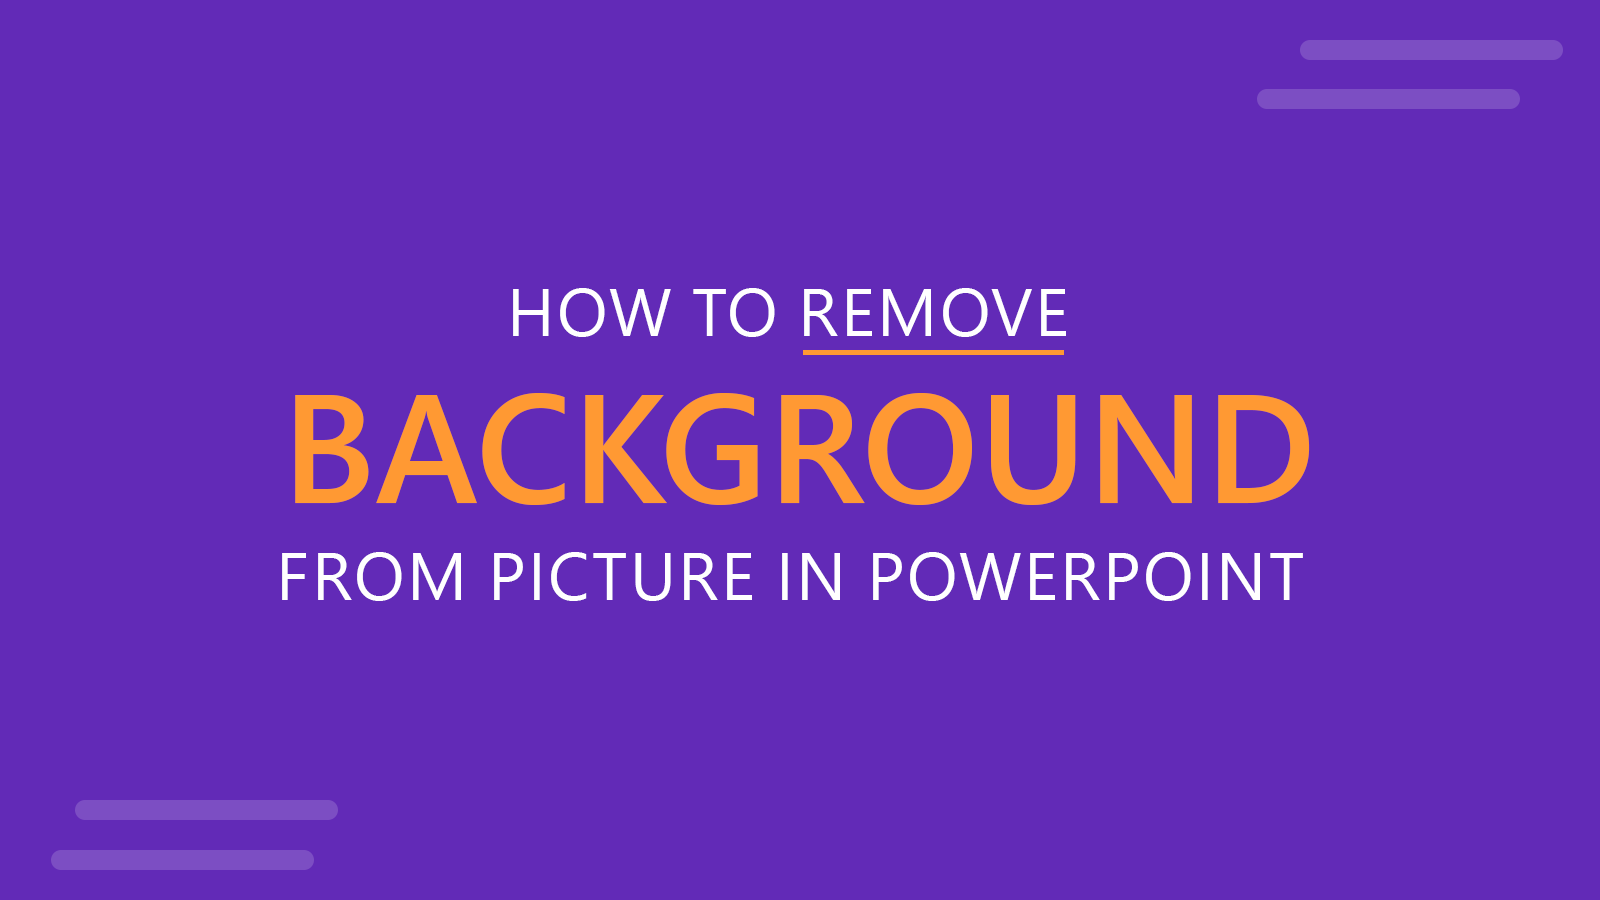 How to Remove Background from Picture in PowerPoint